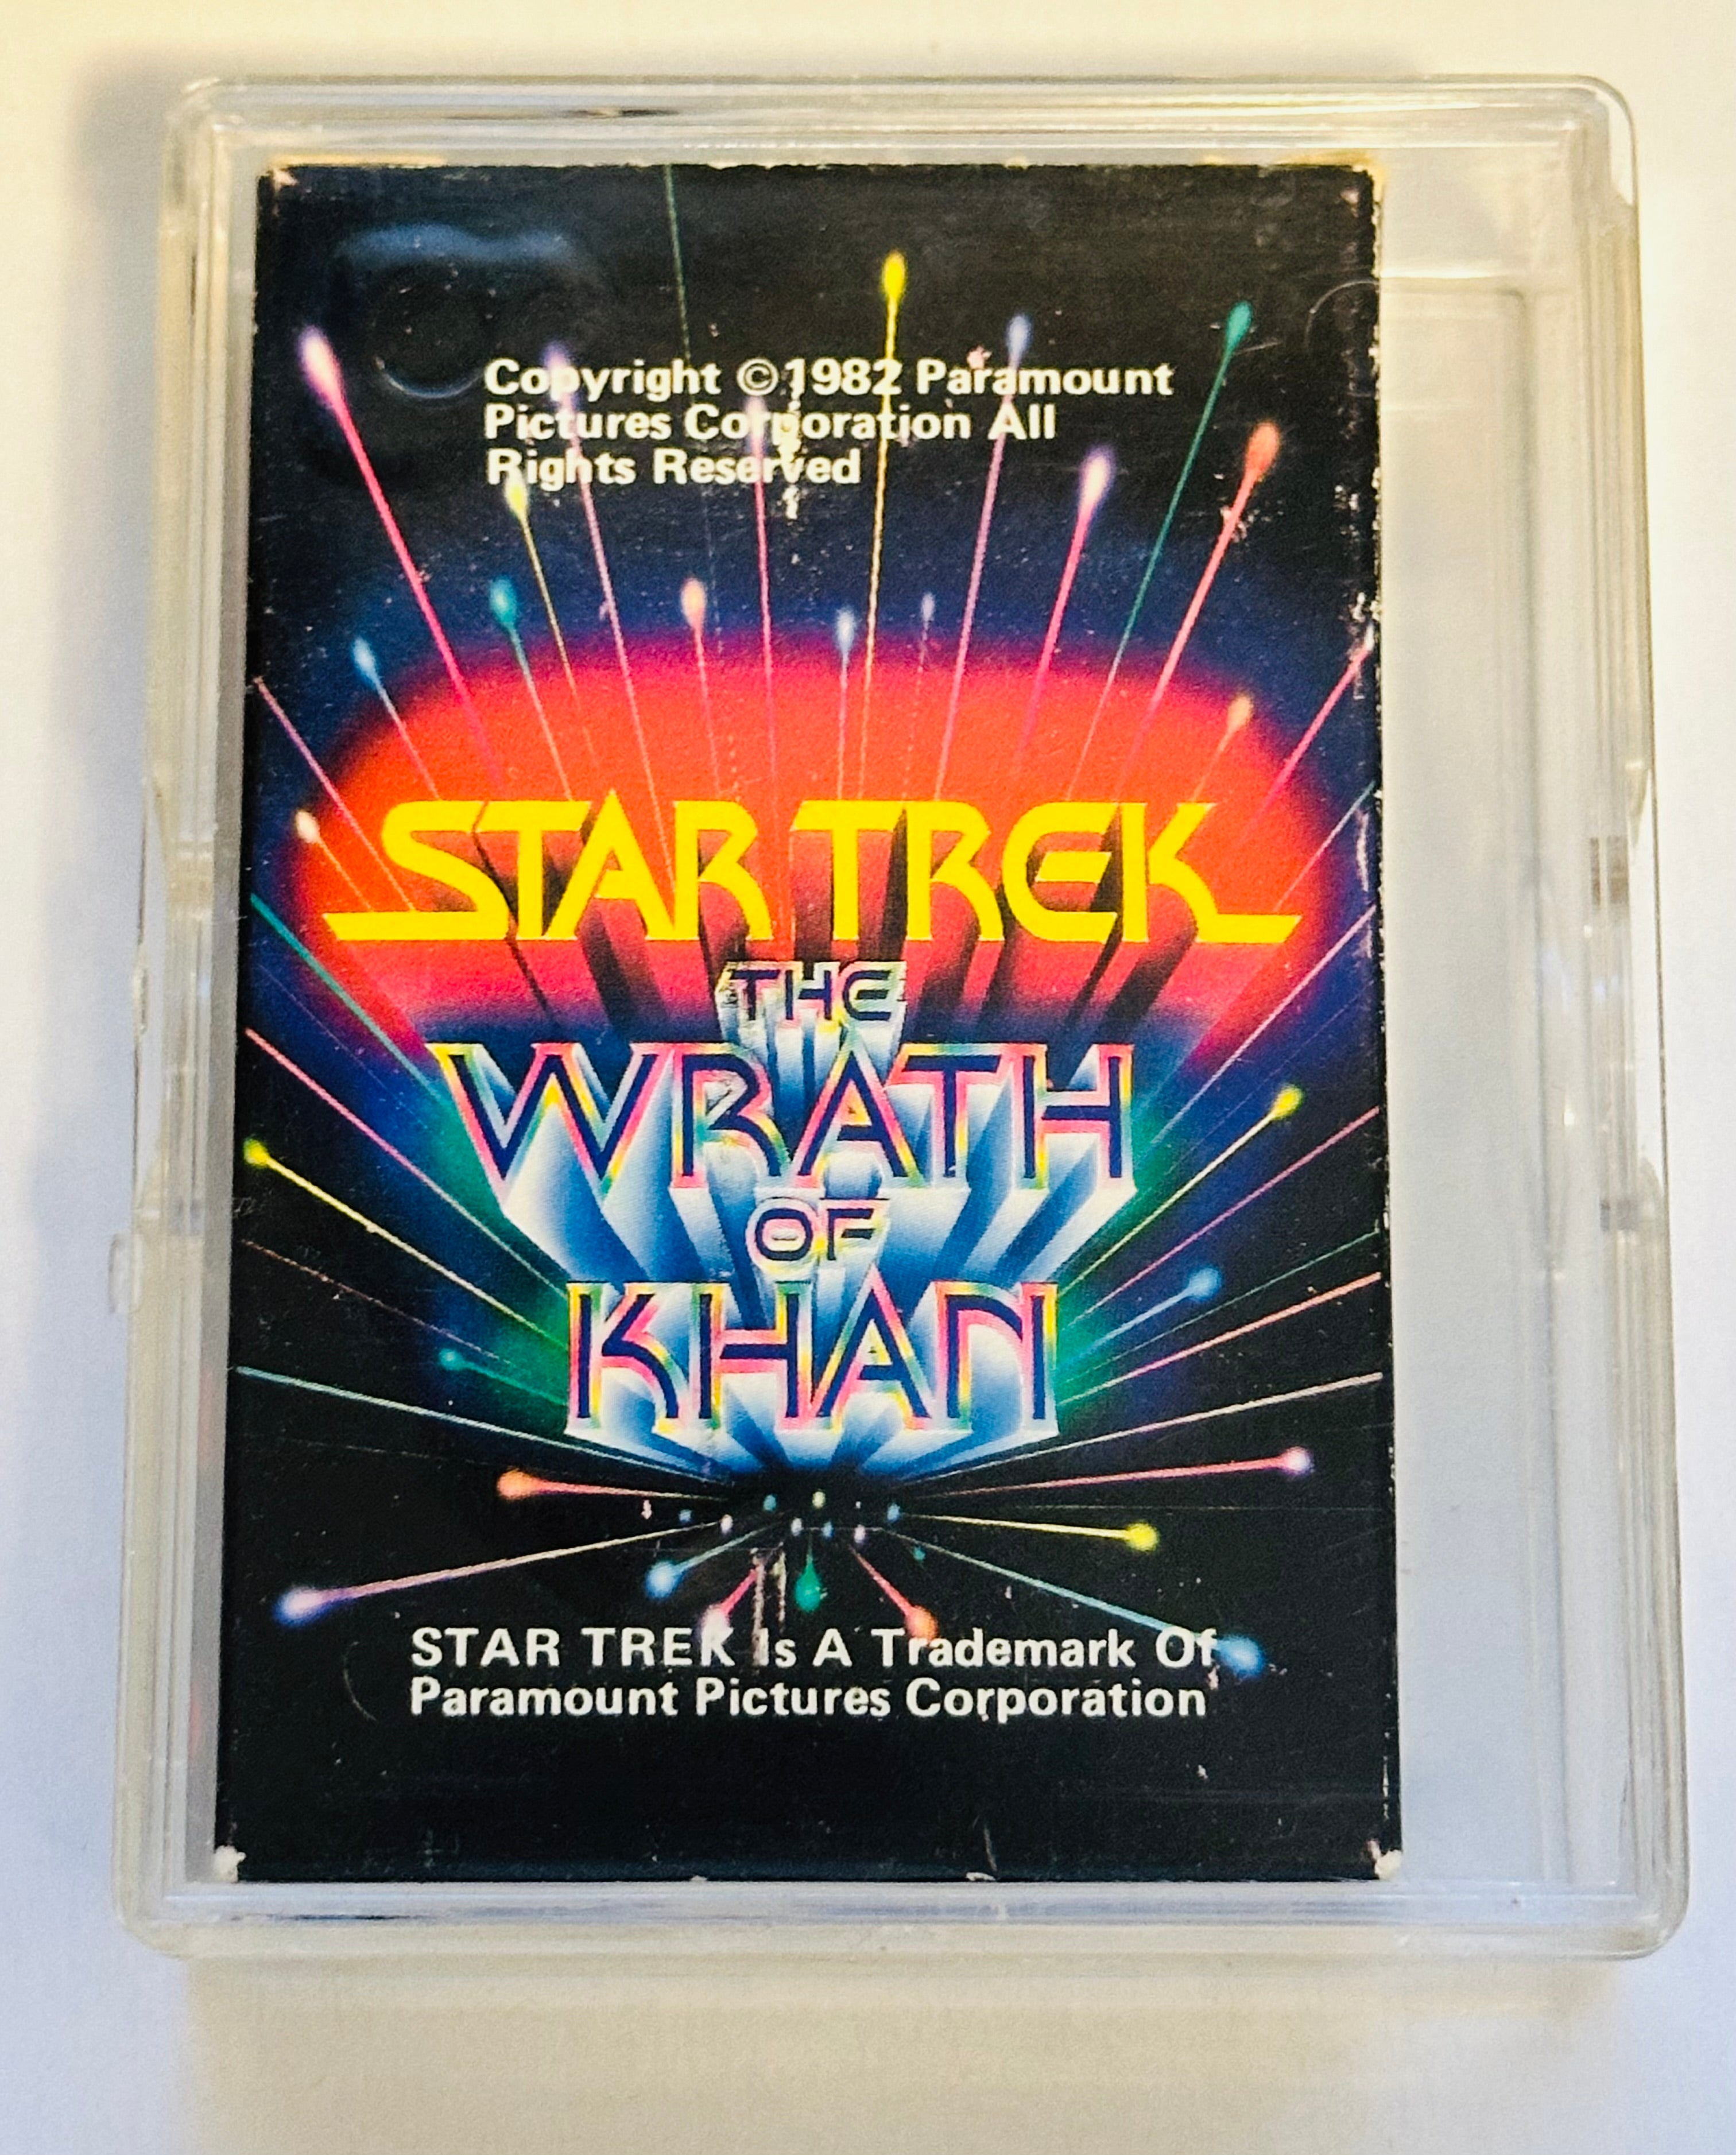 Star Trek wrath of Khan movie limited issued playing card deck 1982